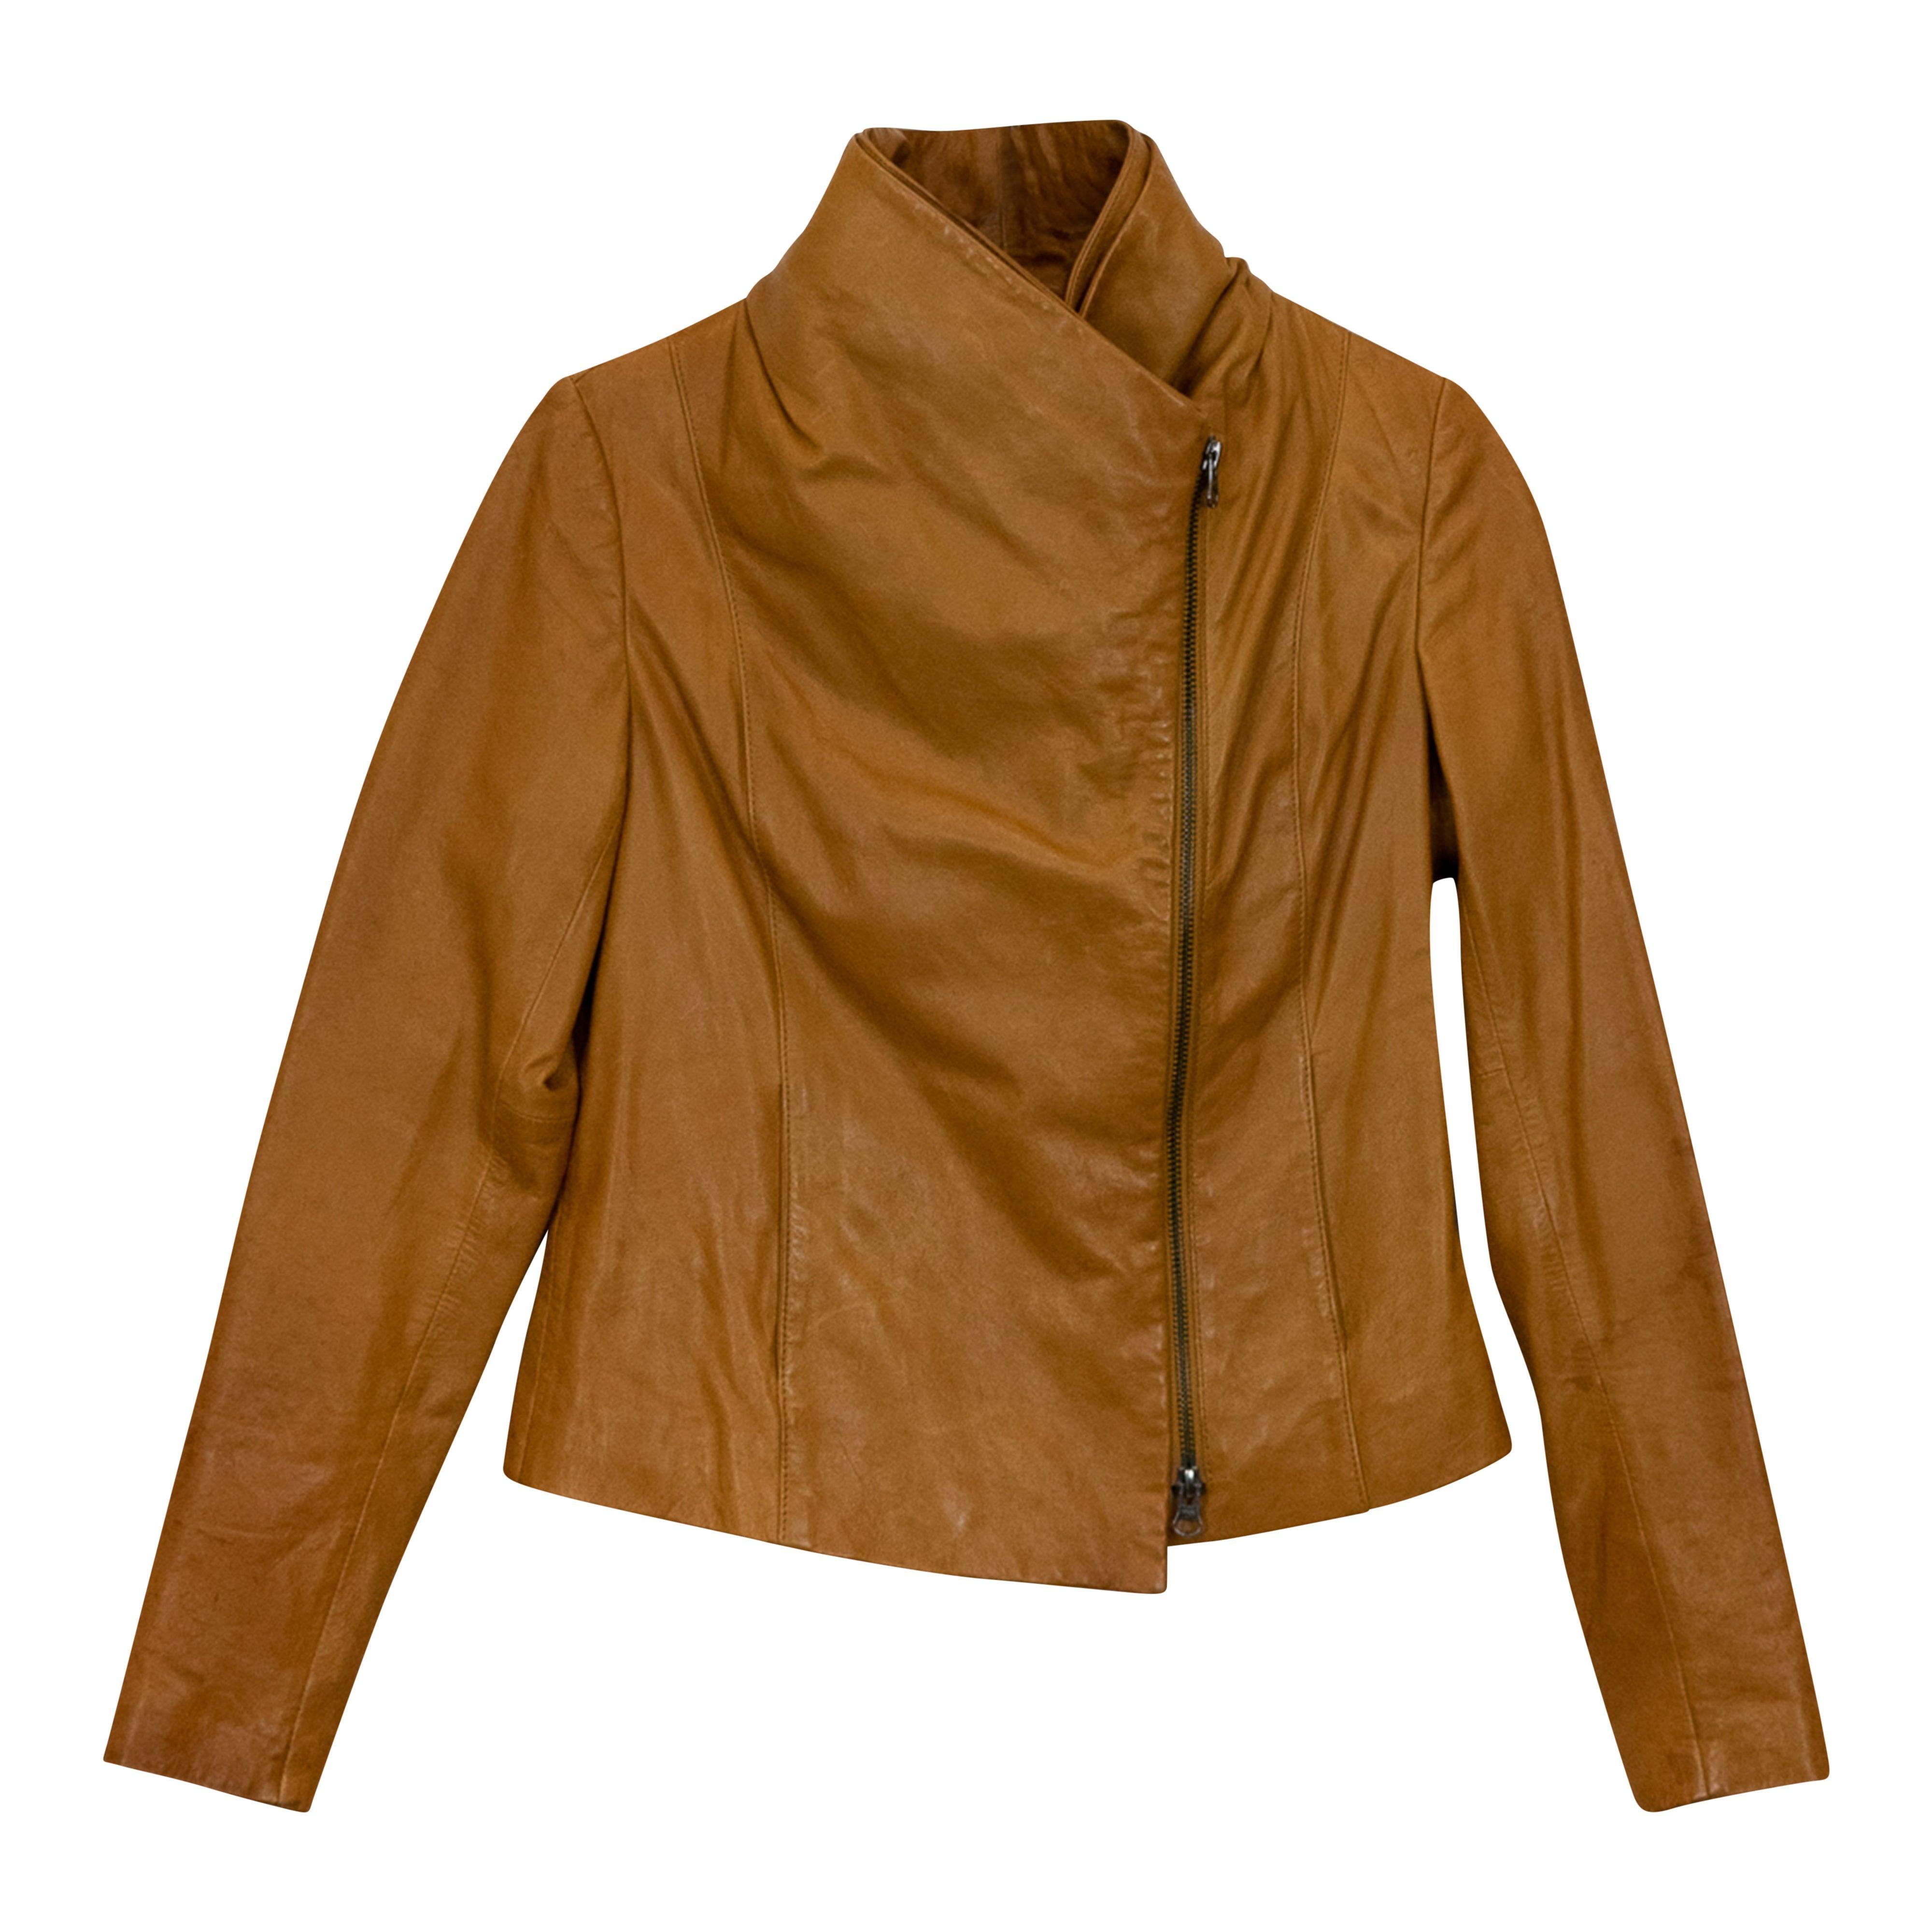 Vince Jacket - XS - Fashionably Yours